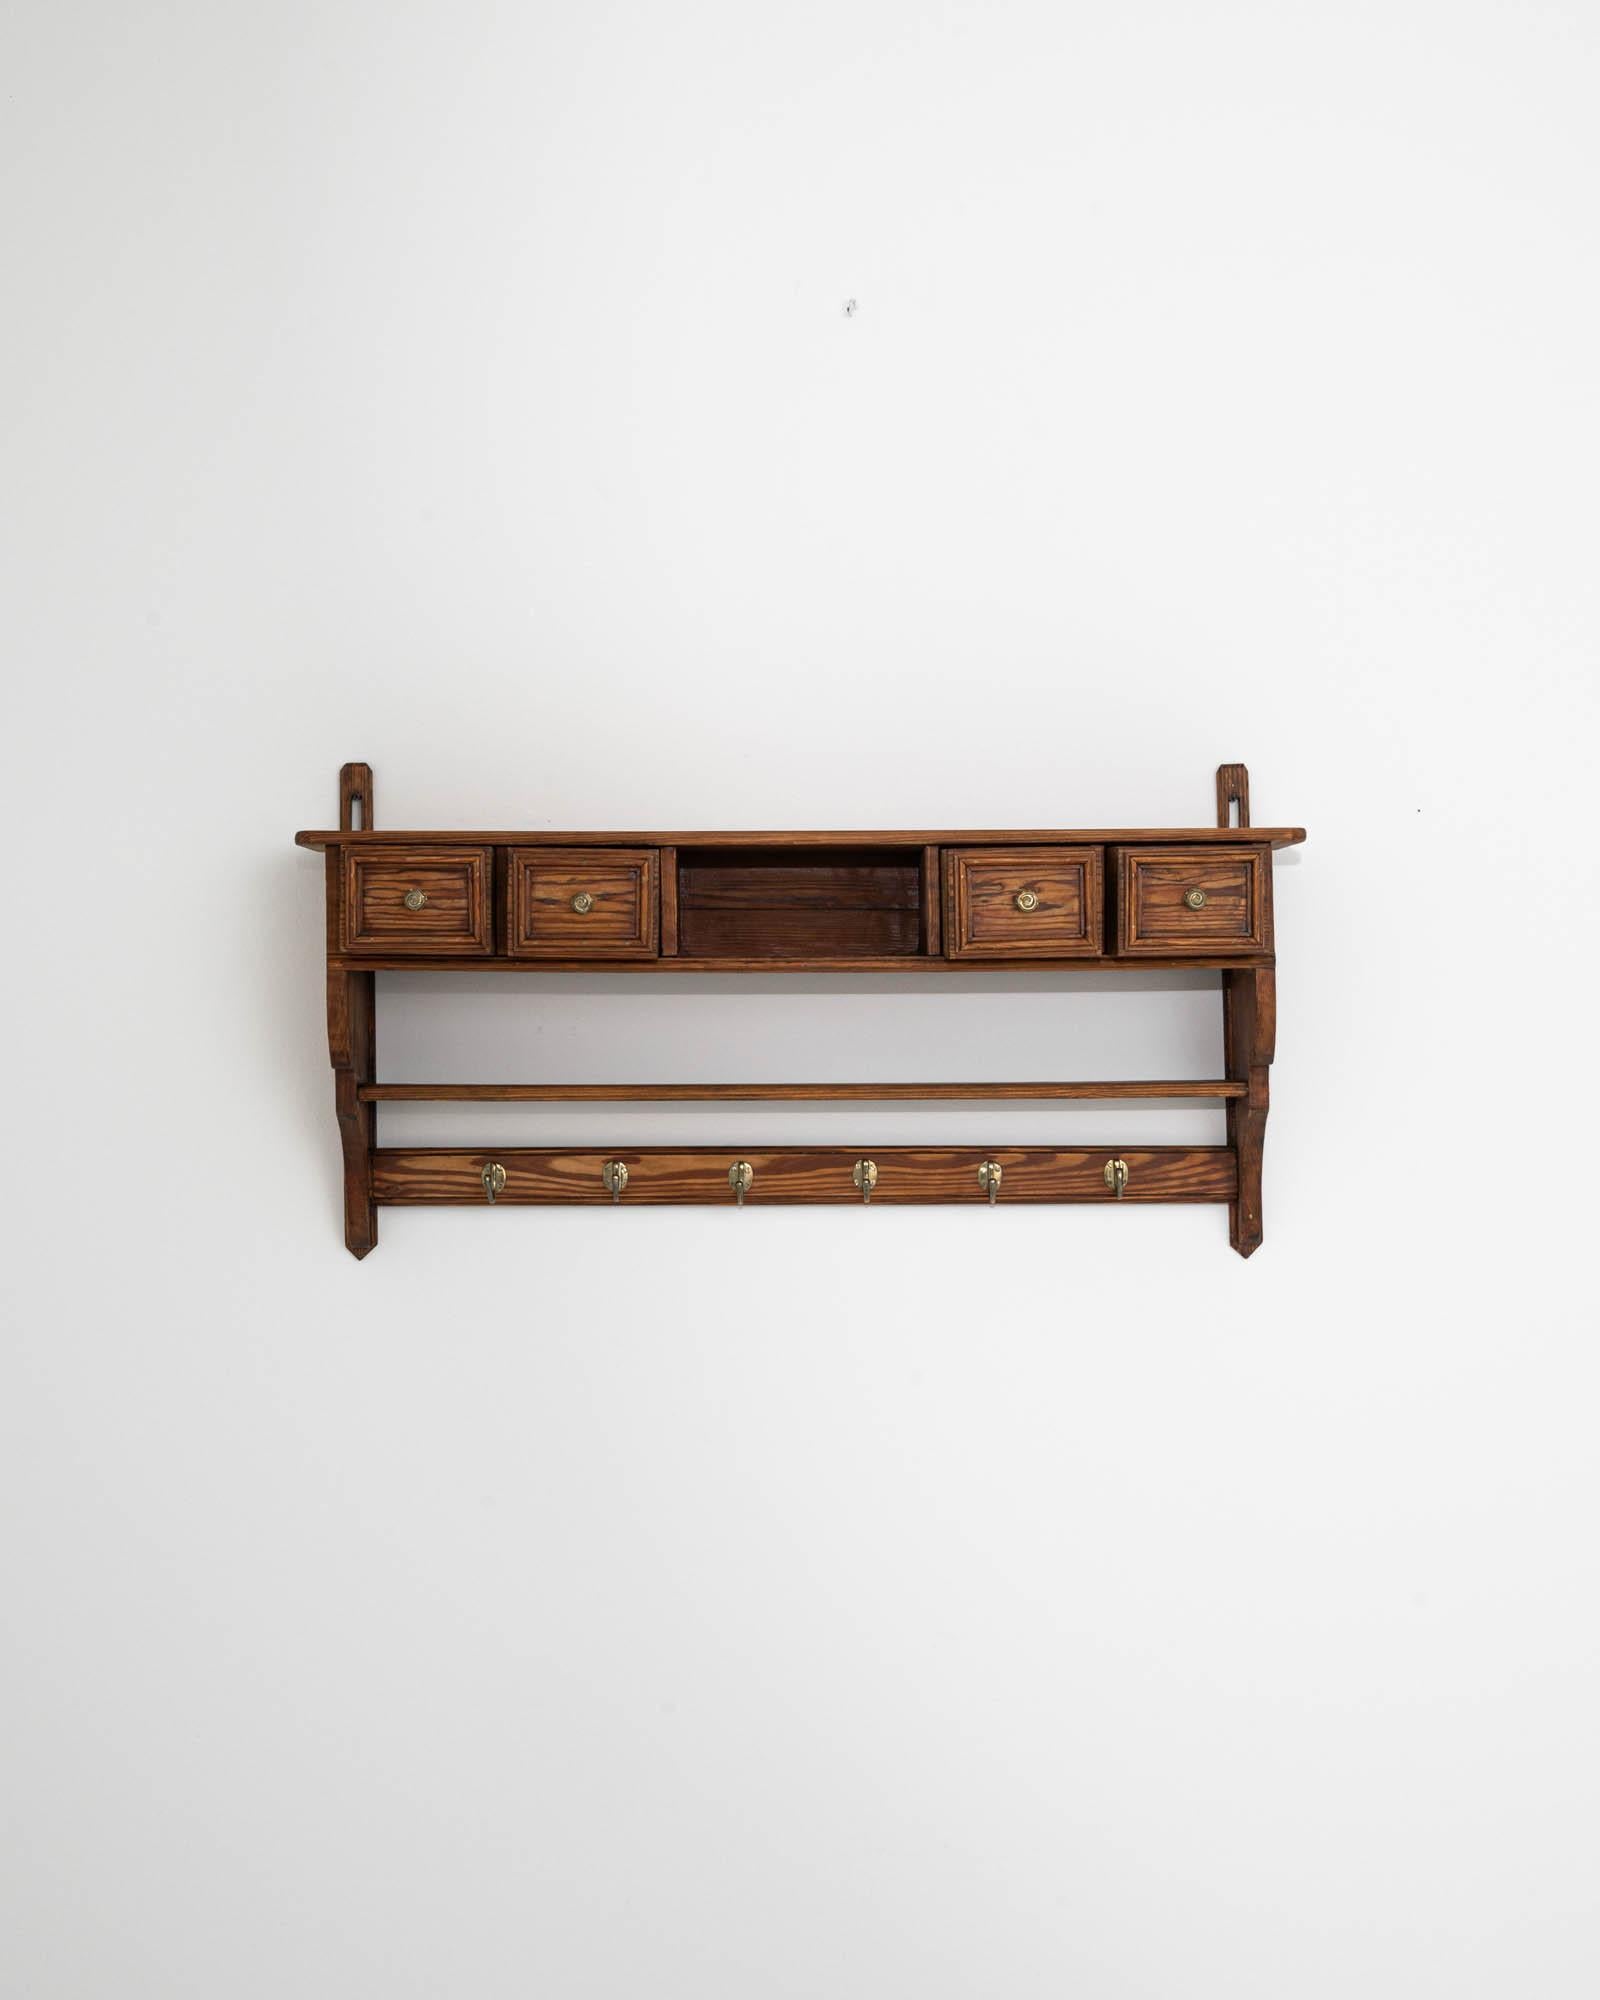 1900s French Wooden Kitchen Wall Shelf In Good Condition For Sale In High Point, NC